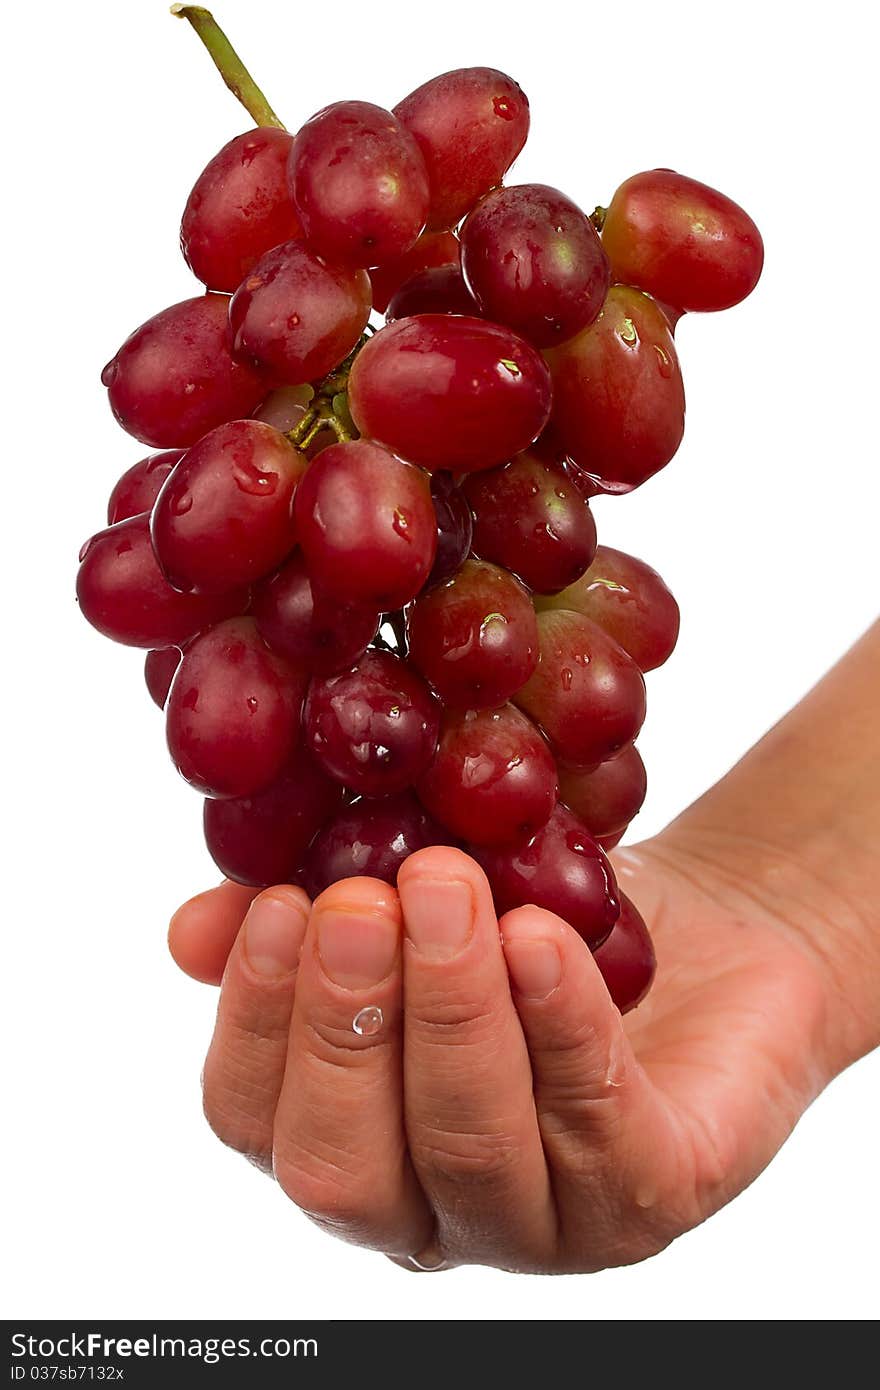 Hands holding grapes while water flows on white background